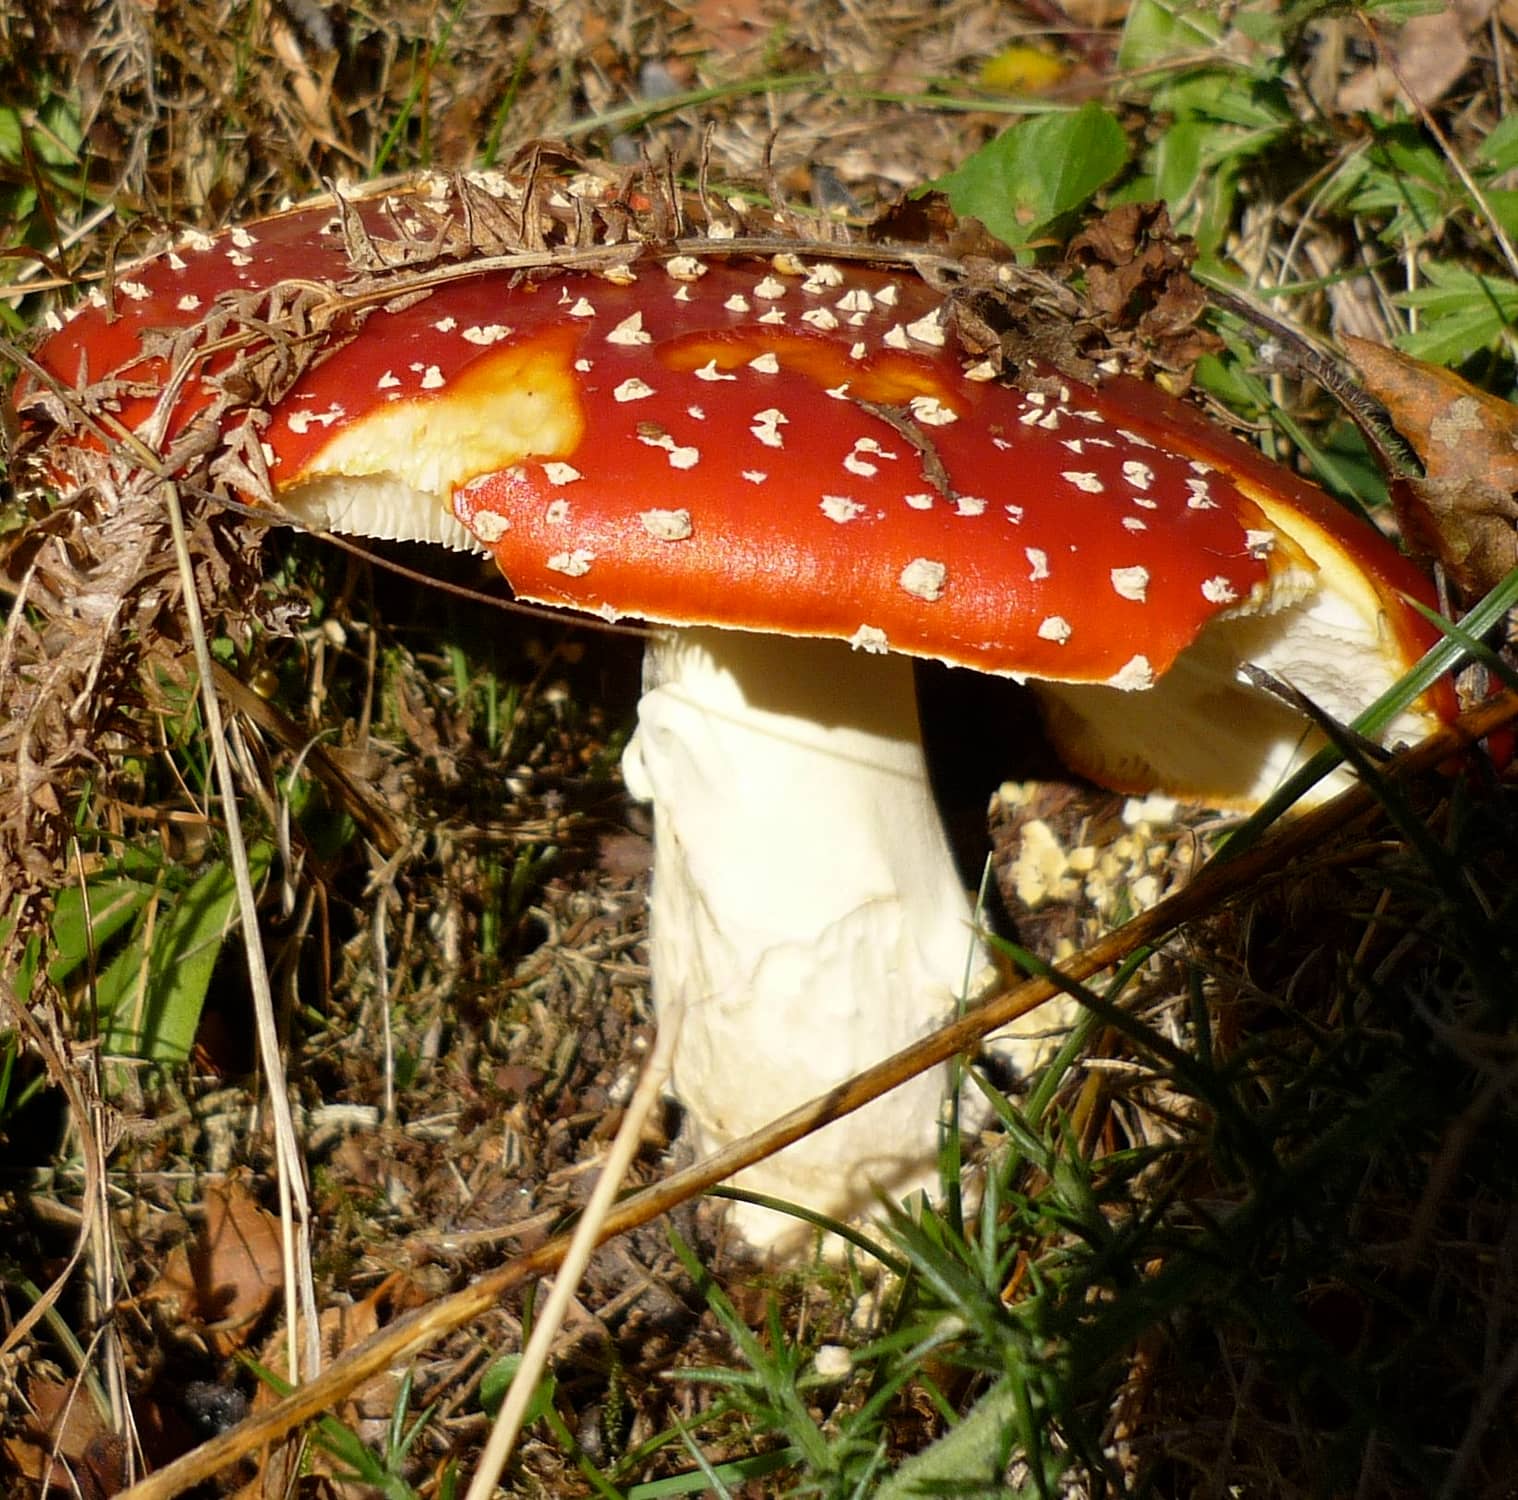 Fly agaric, one of our most distinct and toxic mushrooms